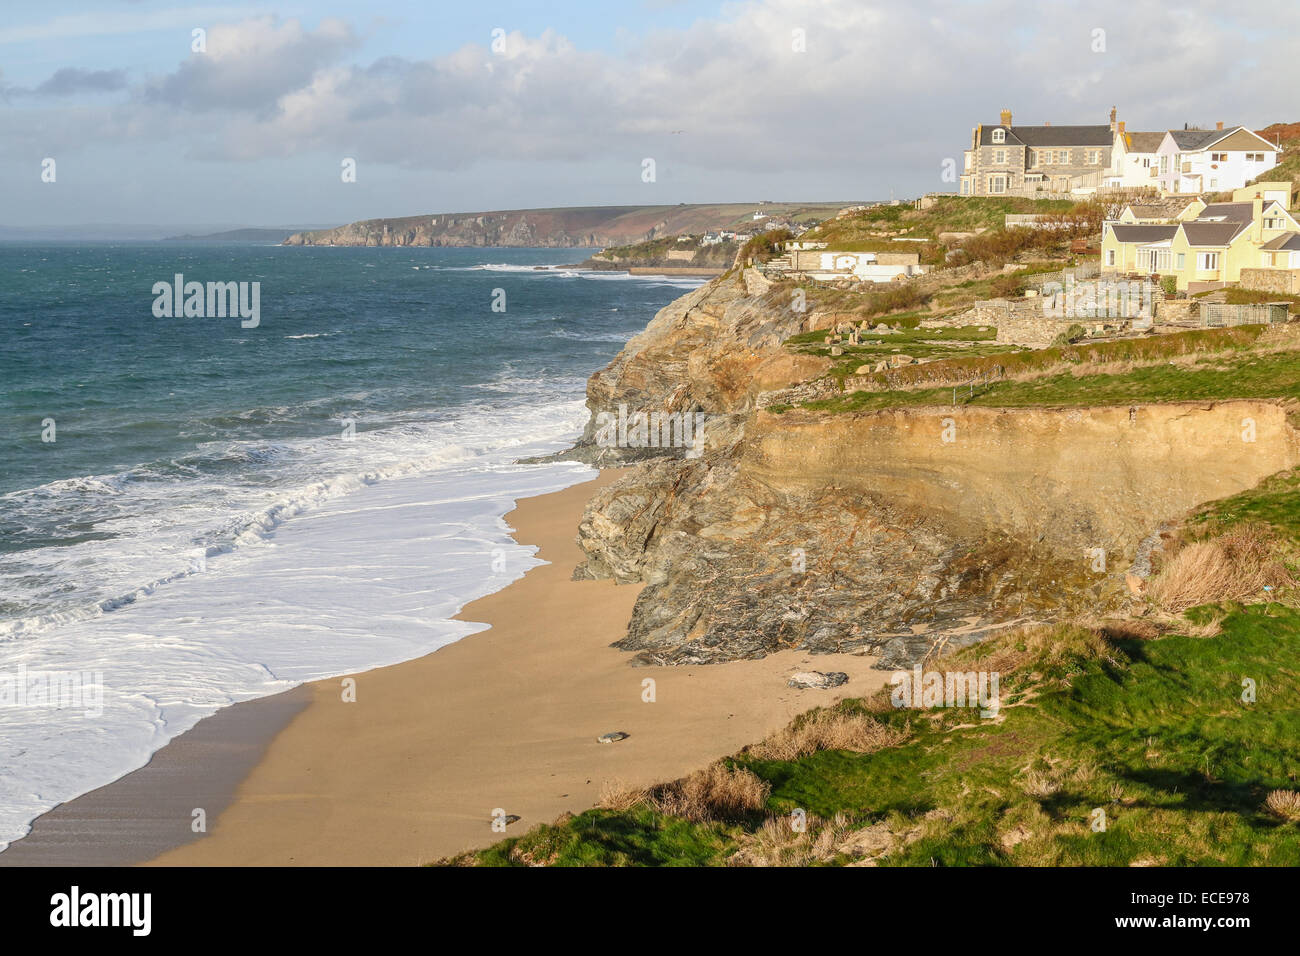 Loe Bar, Porthleven with waves breaking on a sandy beach on a sunny December day.  Overlooked by holiday cottages. Stock Photo